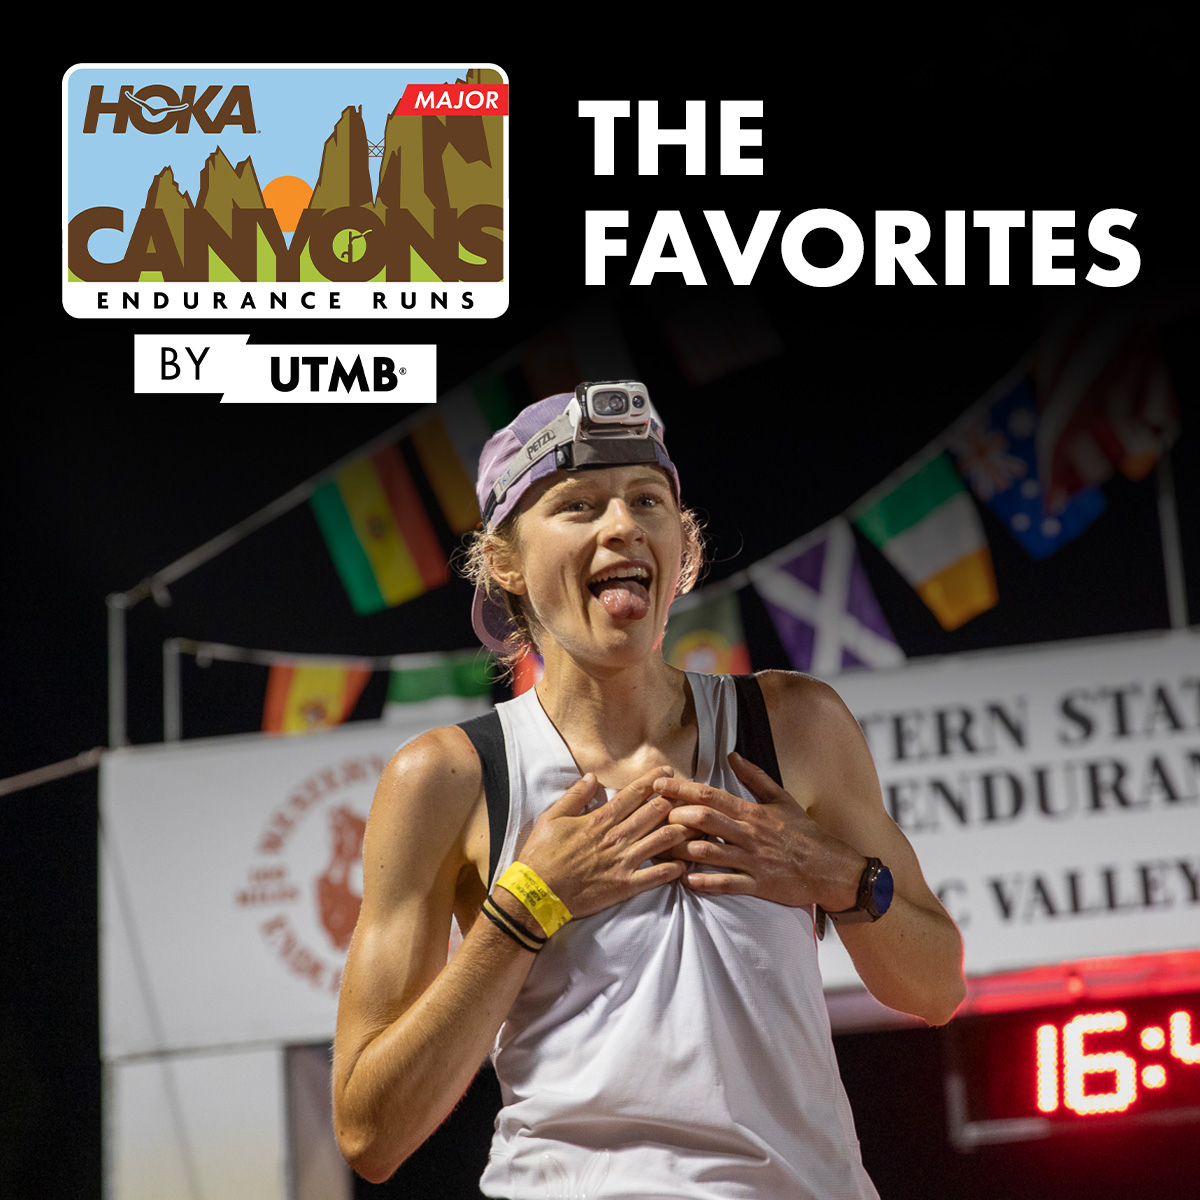 🇺🇸 @hoka Canyons Endurance Runs by UTMB | The Favorites ⤵️ A 10th edition that promises strong battles for the first #UTMBWorldSeries Major. Find some of the big names in our latest Strava article: strava.com/clubs/228759/p… #UTMBLIVE 👉live.utmb.world 📺📍📊 #Canyons